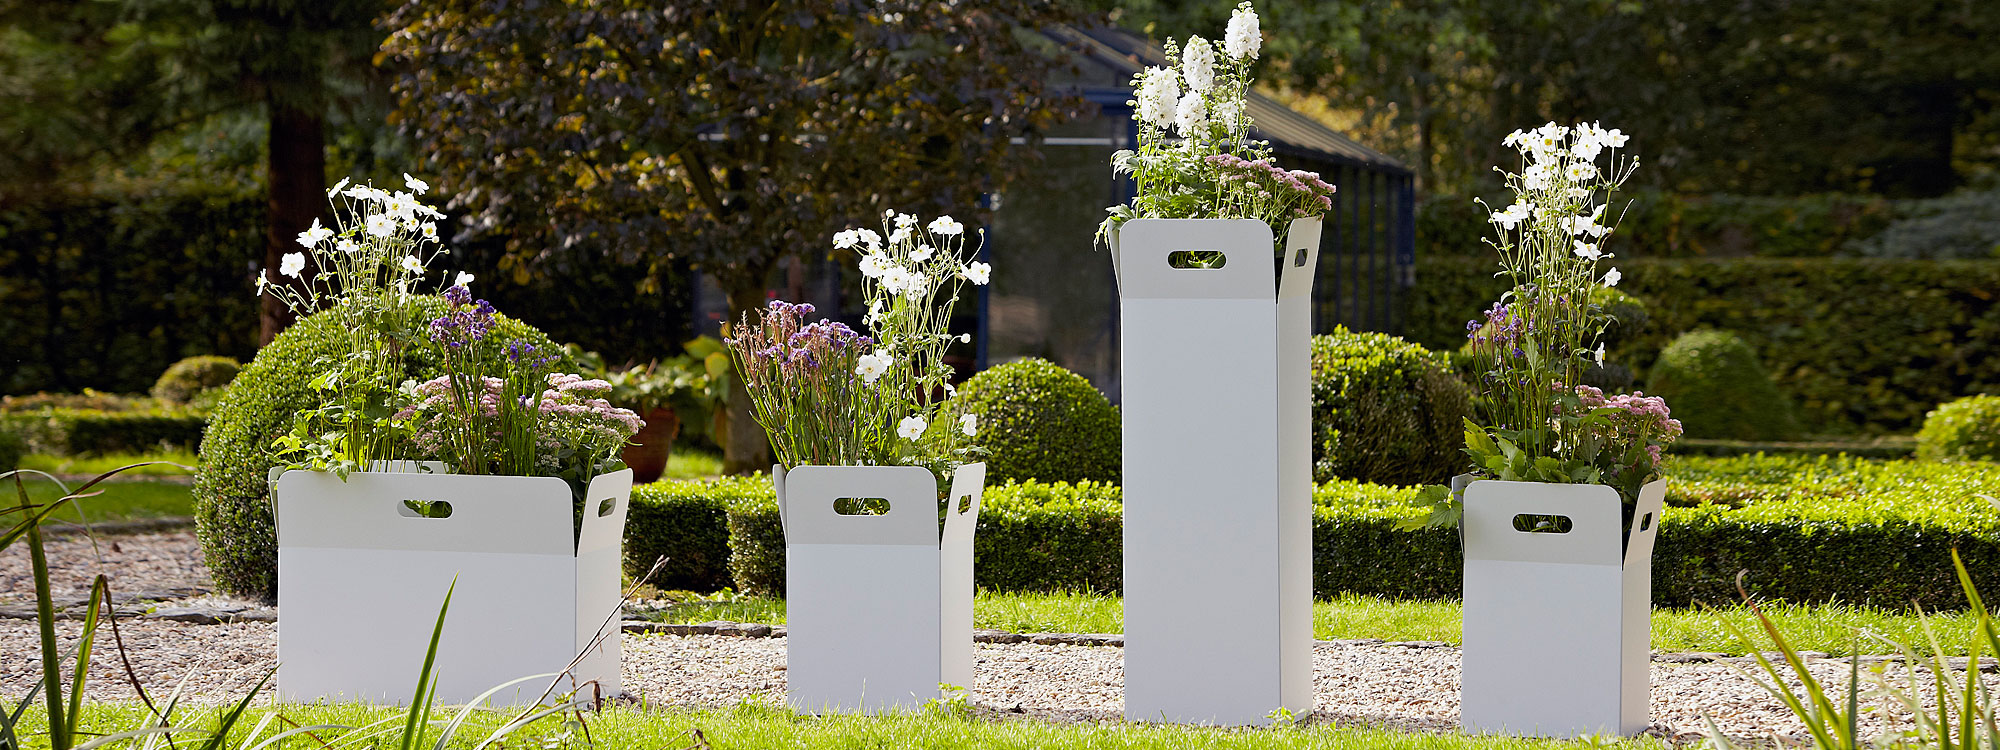 Image of different sizes of Flora Box modern planters. planted with Hydrangeas and Japanese anemones